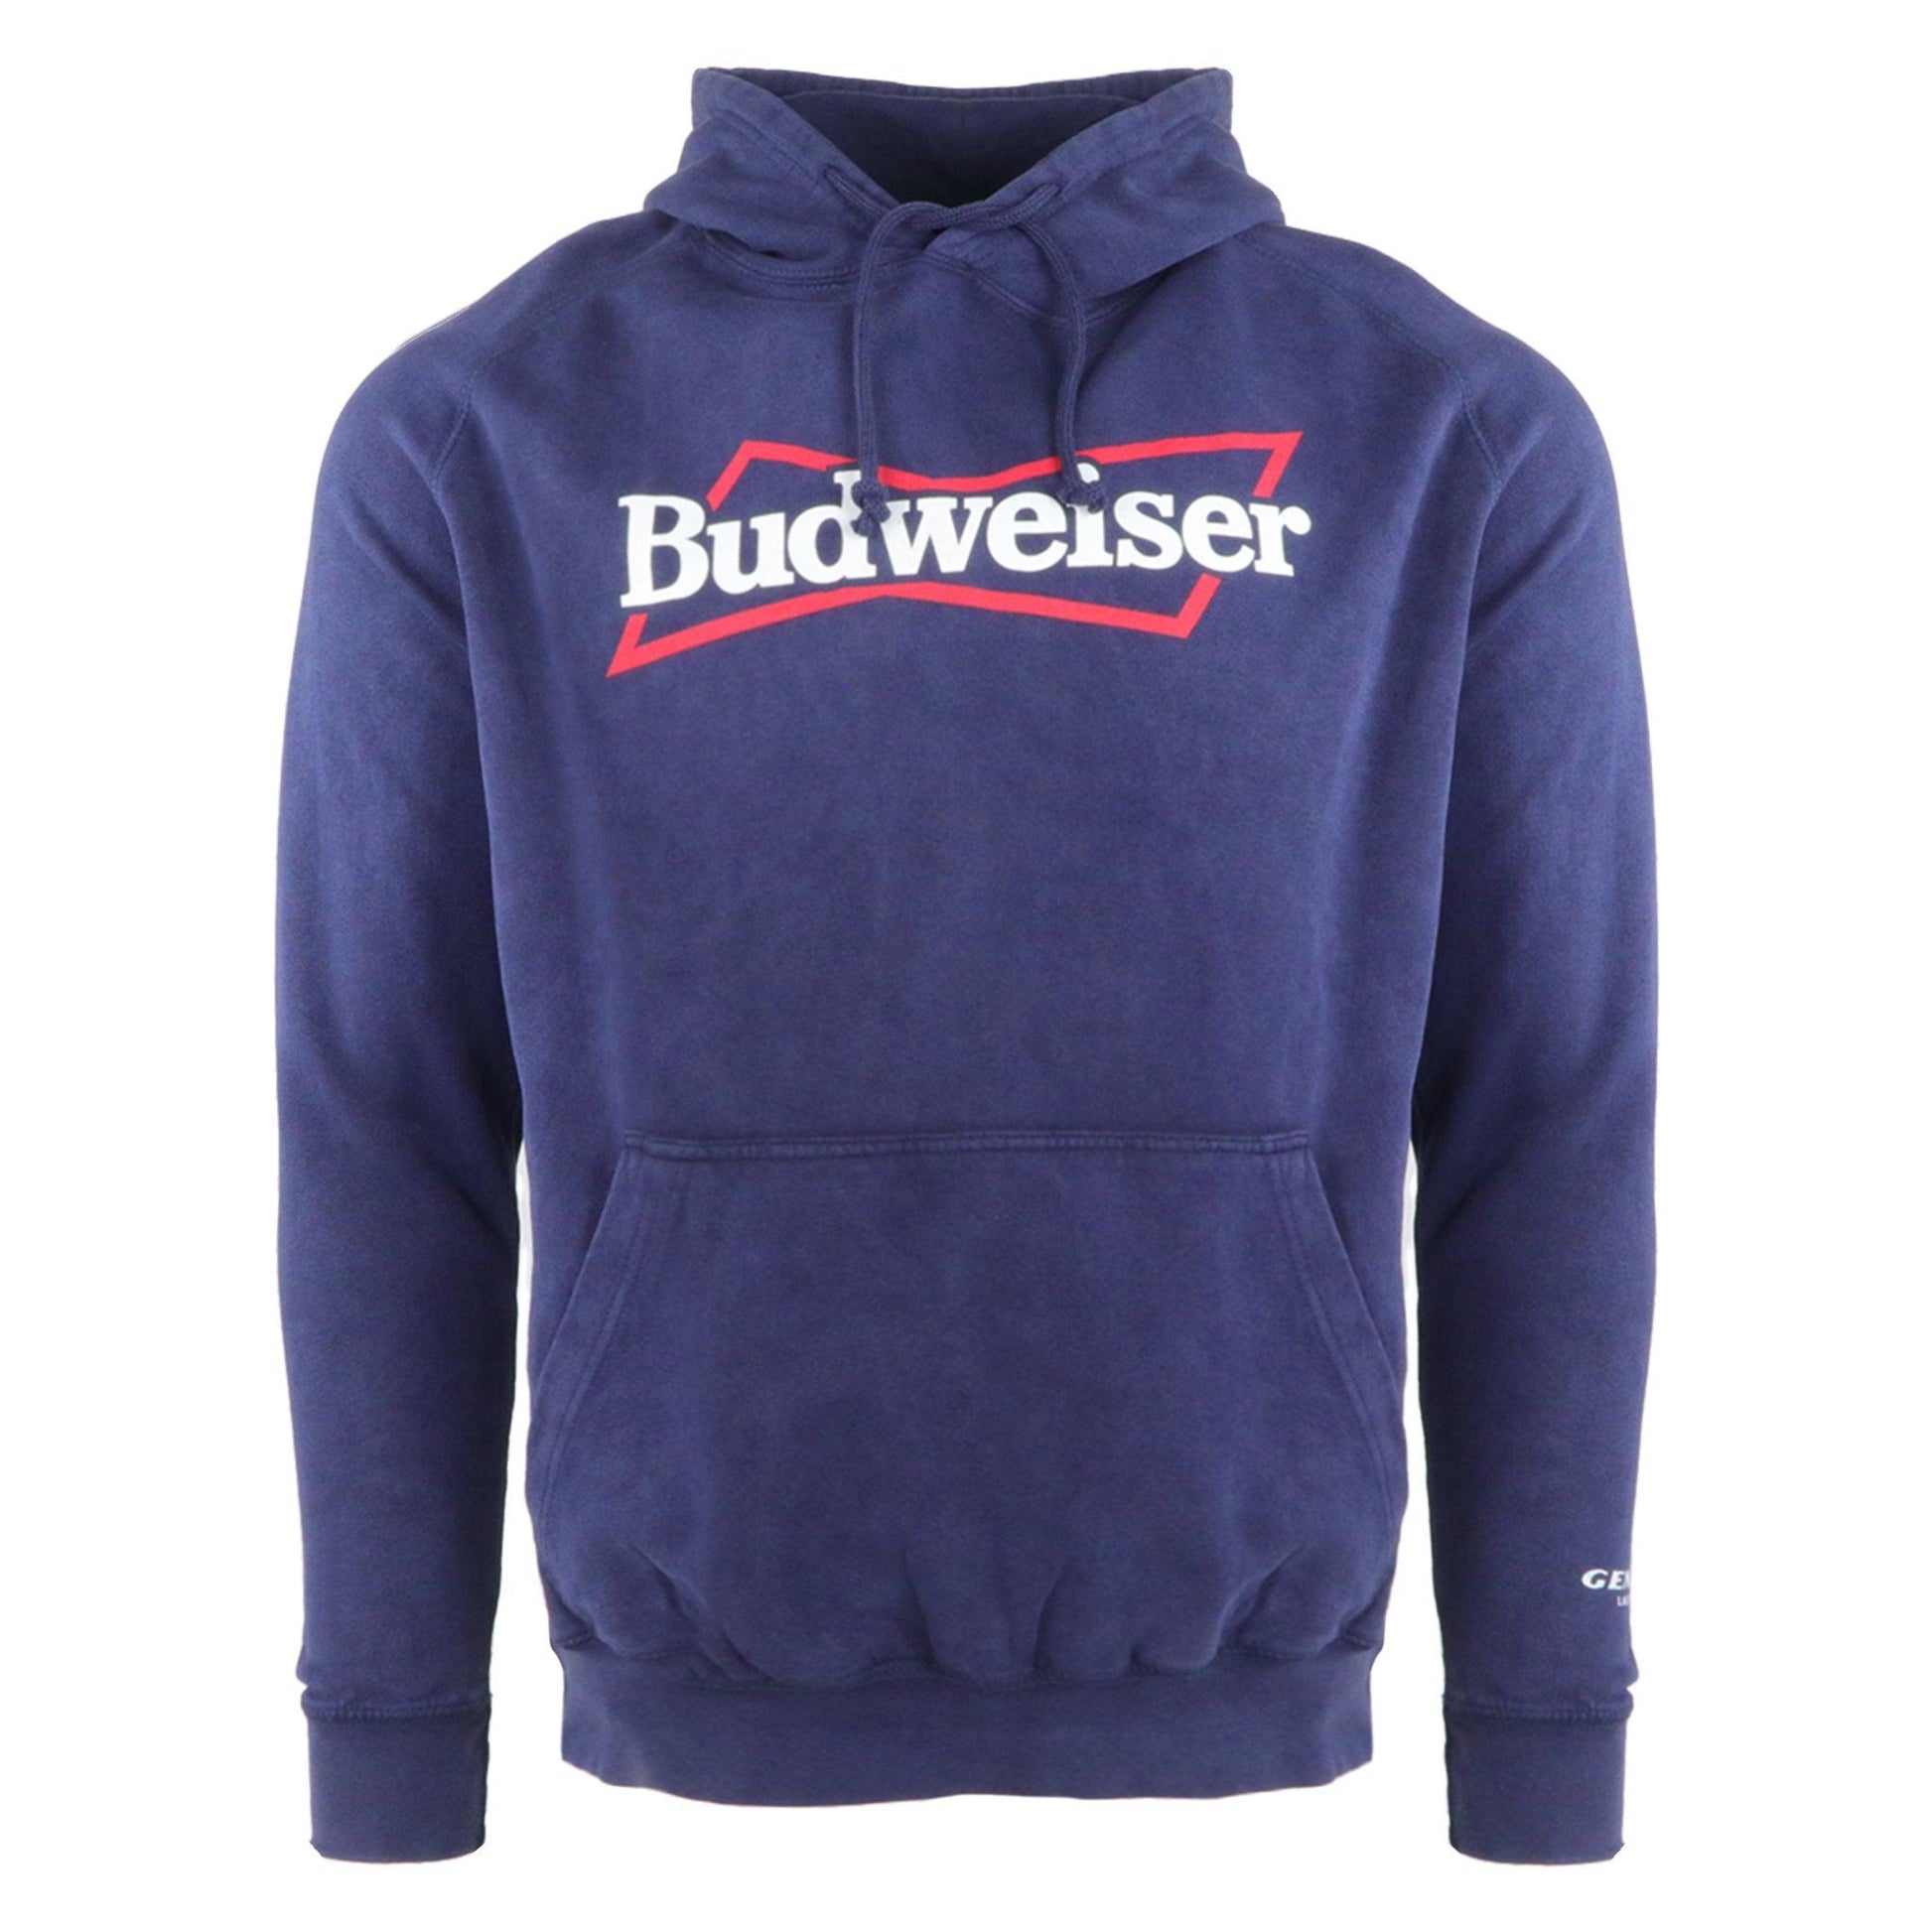 Navy blue hoodie with Budweiser spelled out inside of outline of bowtie. Drawstrings from hood and front pocket